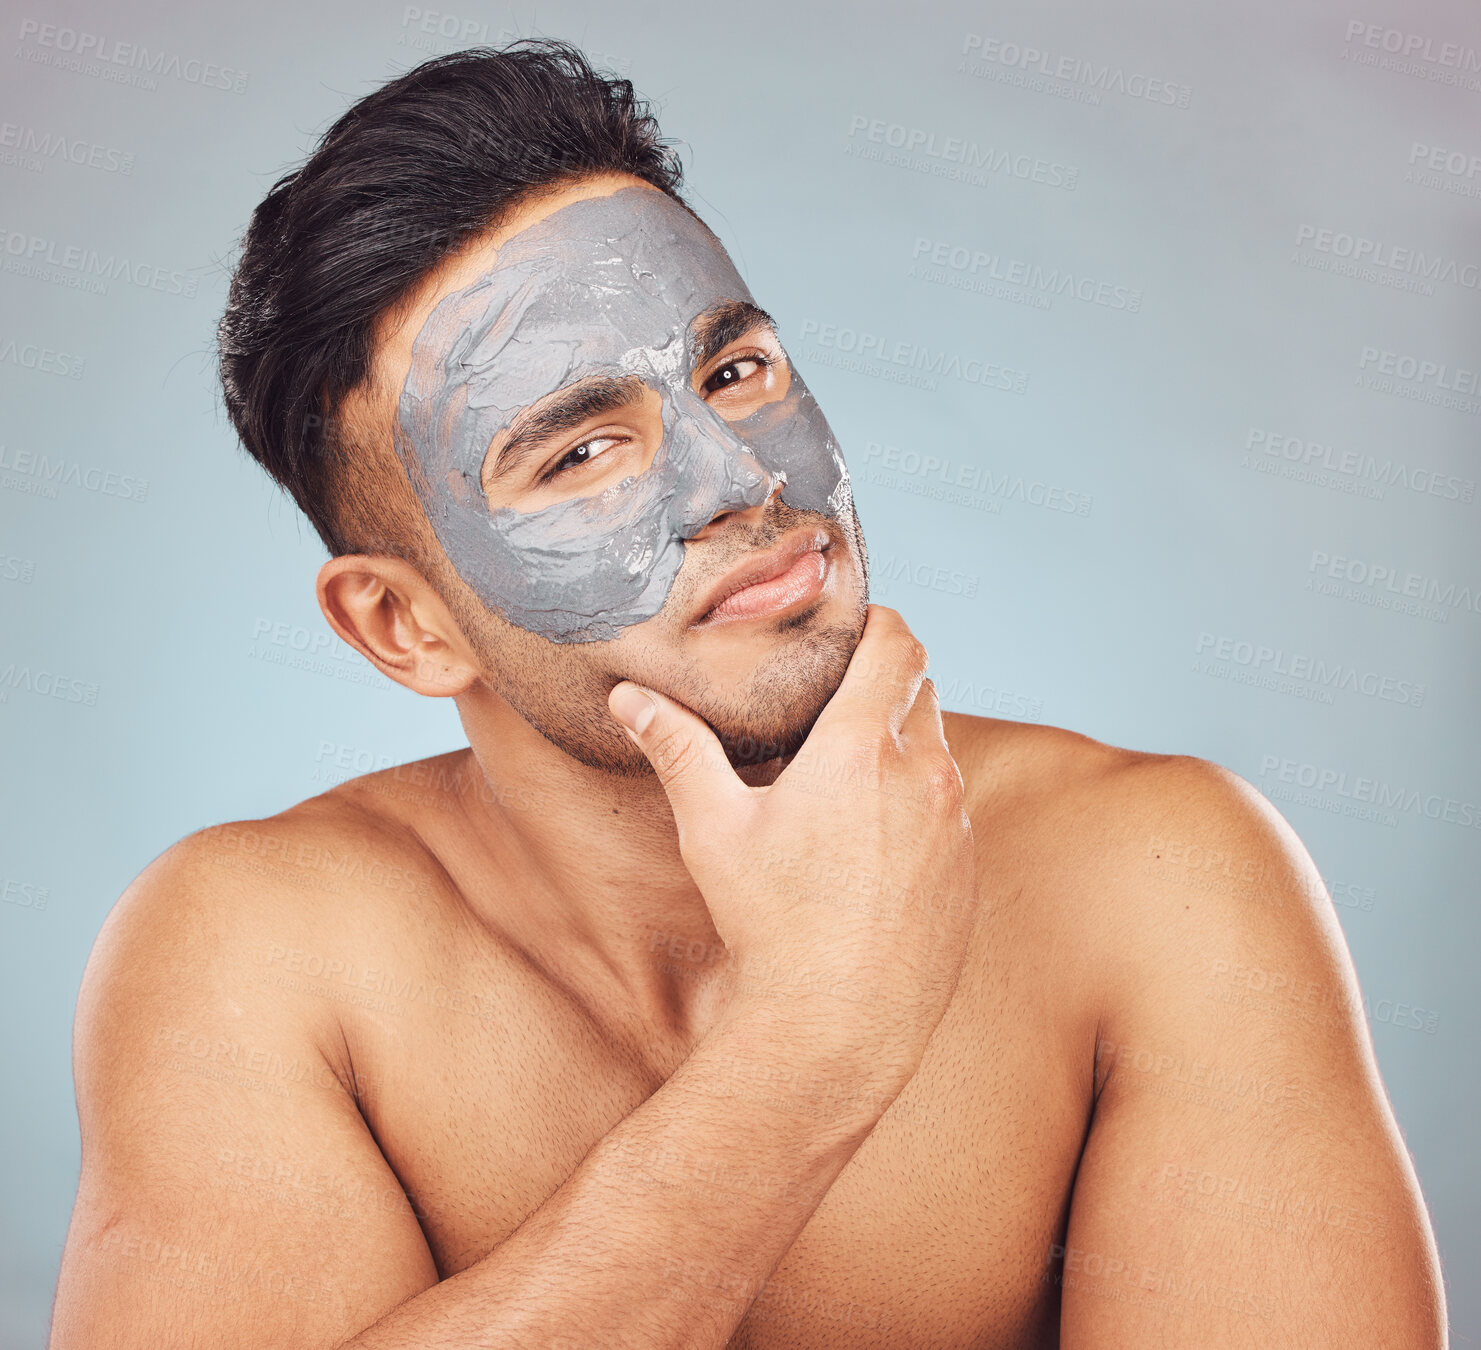 Buy stock photo Portrait of one handsome young indian man applying an anti aging facial mask against a blue studio background. Mixed race guy wearing a moisturising clay or charcoal cream product on his face to get rid of blackheads for healthy, smooth and soft skin